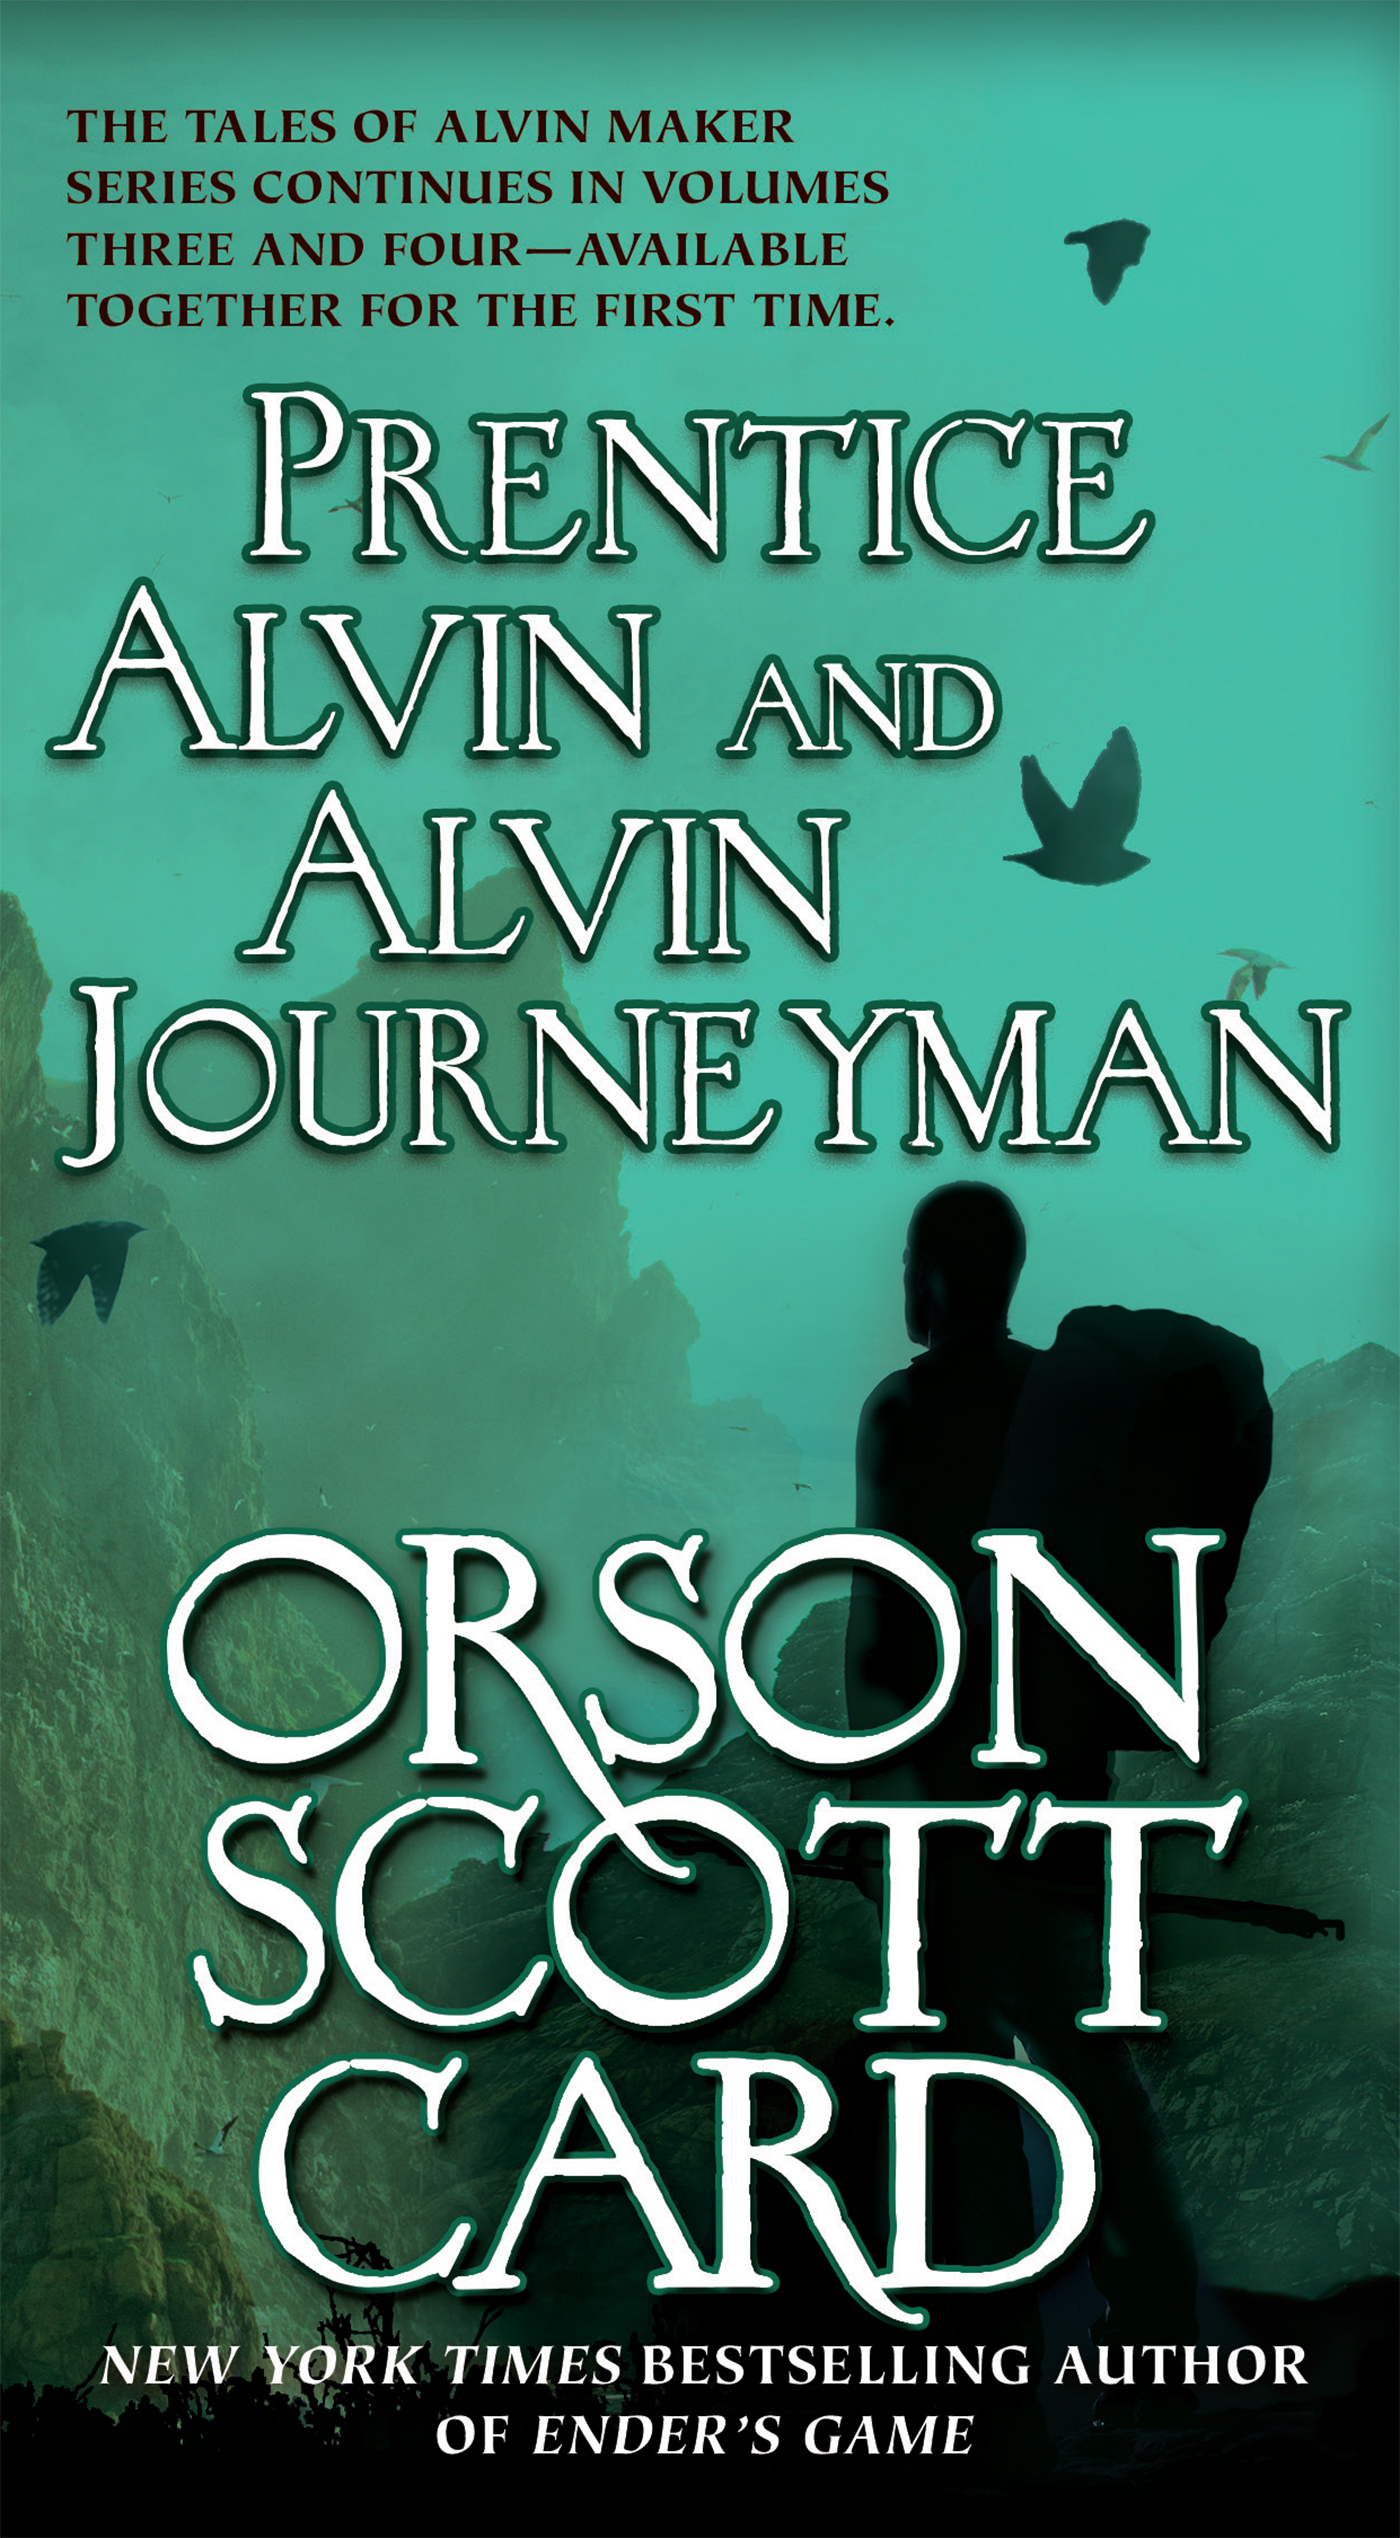 Prentice Alvin and Alvin Journeyman : The Third and Fourth Volumes of The Tales of Alvin Maker by Orson Scott Card